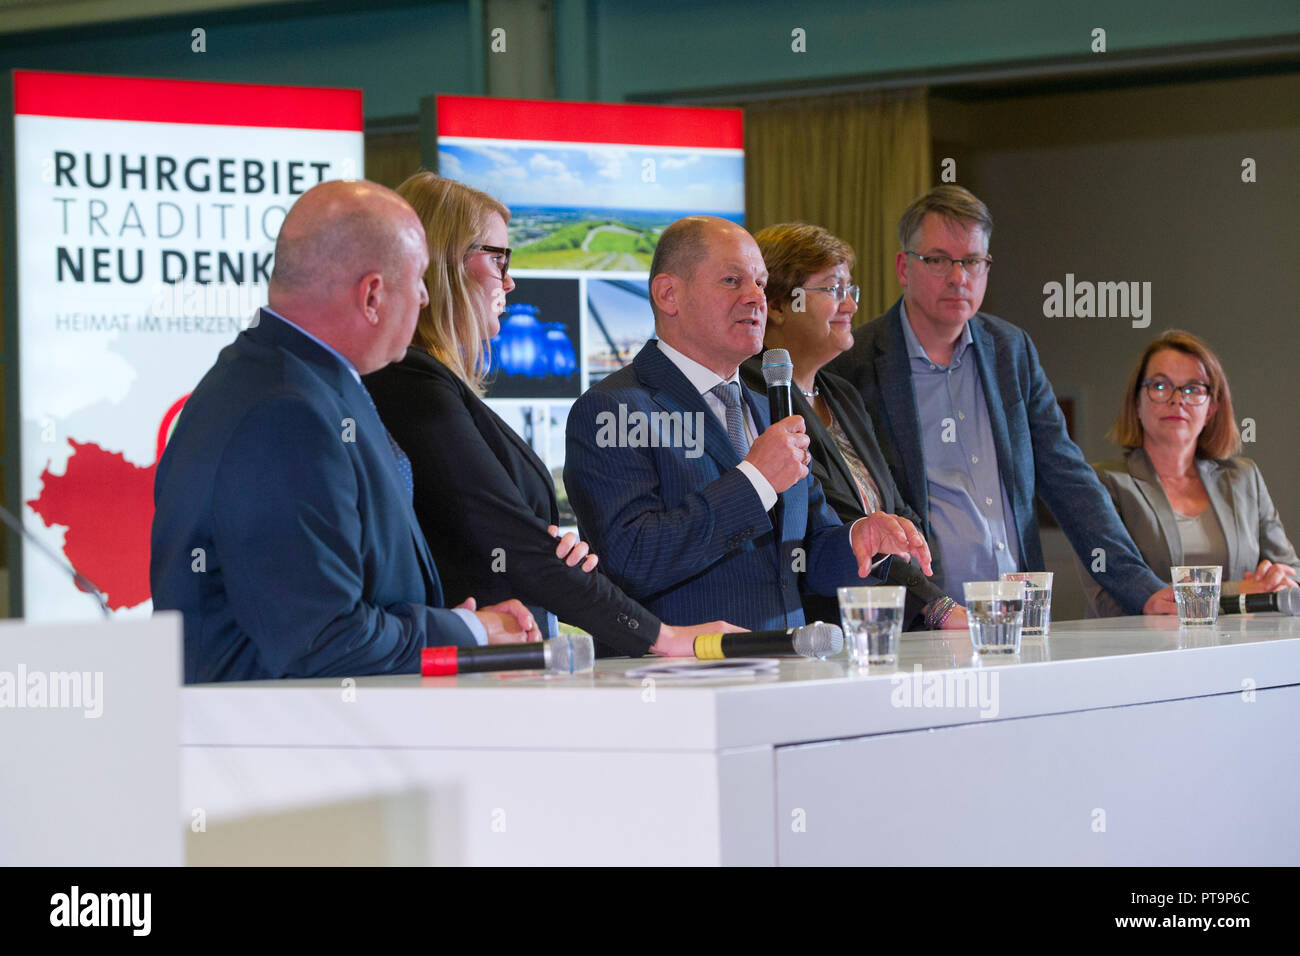 from left: Michael GERDES, MdB, Lisa KAPTEINAT, SPD, Spokeswoman of the Ruhr-MdL in the NRW state parliament, Olaf SCHOLZ, SPD, Federal Finance Minister and Vice-Chancellor, Karola GEISS-NETTHOEFEL, Geivu-Netthv? fel, Regional Director of the Regionalverband Ruhr (RVR), Achim VANSELOW, DGB, German Trade Union Confederation, Nadja LUEDERS, Lvºders, Secretary General of the SPD North Rhine-Westphalia, Conference 'RUHRGEBIET, Aì TRADITION NEW THINKING/HOME IN THE HEART OF EUROPE' of the SPD North Rhine-Westphalia (NRWSPD) in the vocational college Bottrop, 14.09.2018, ¬ | usage worldwide Stock Photo